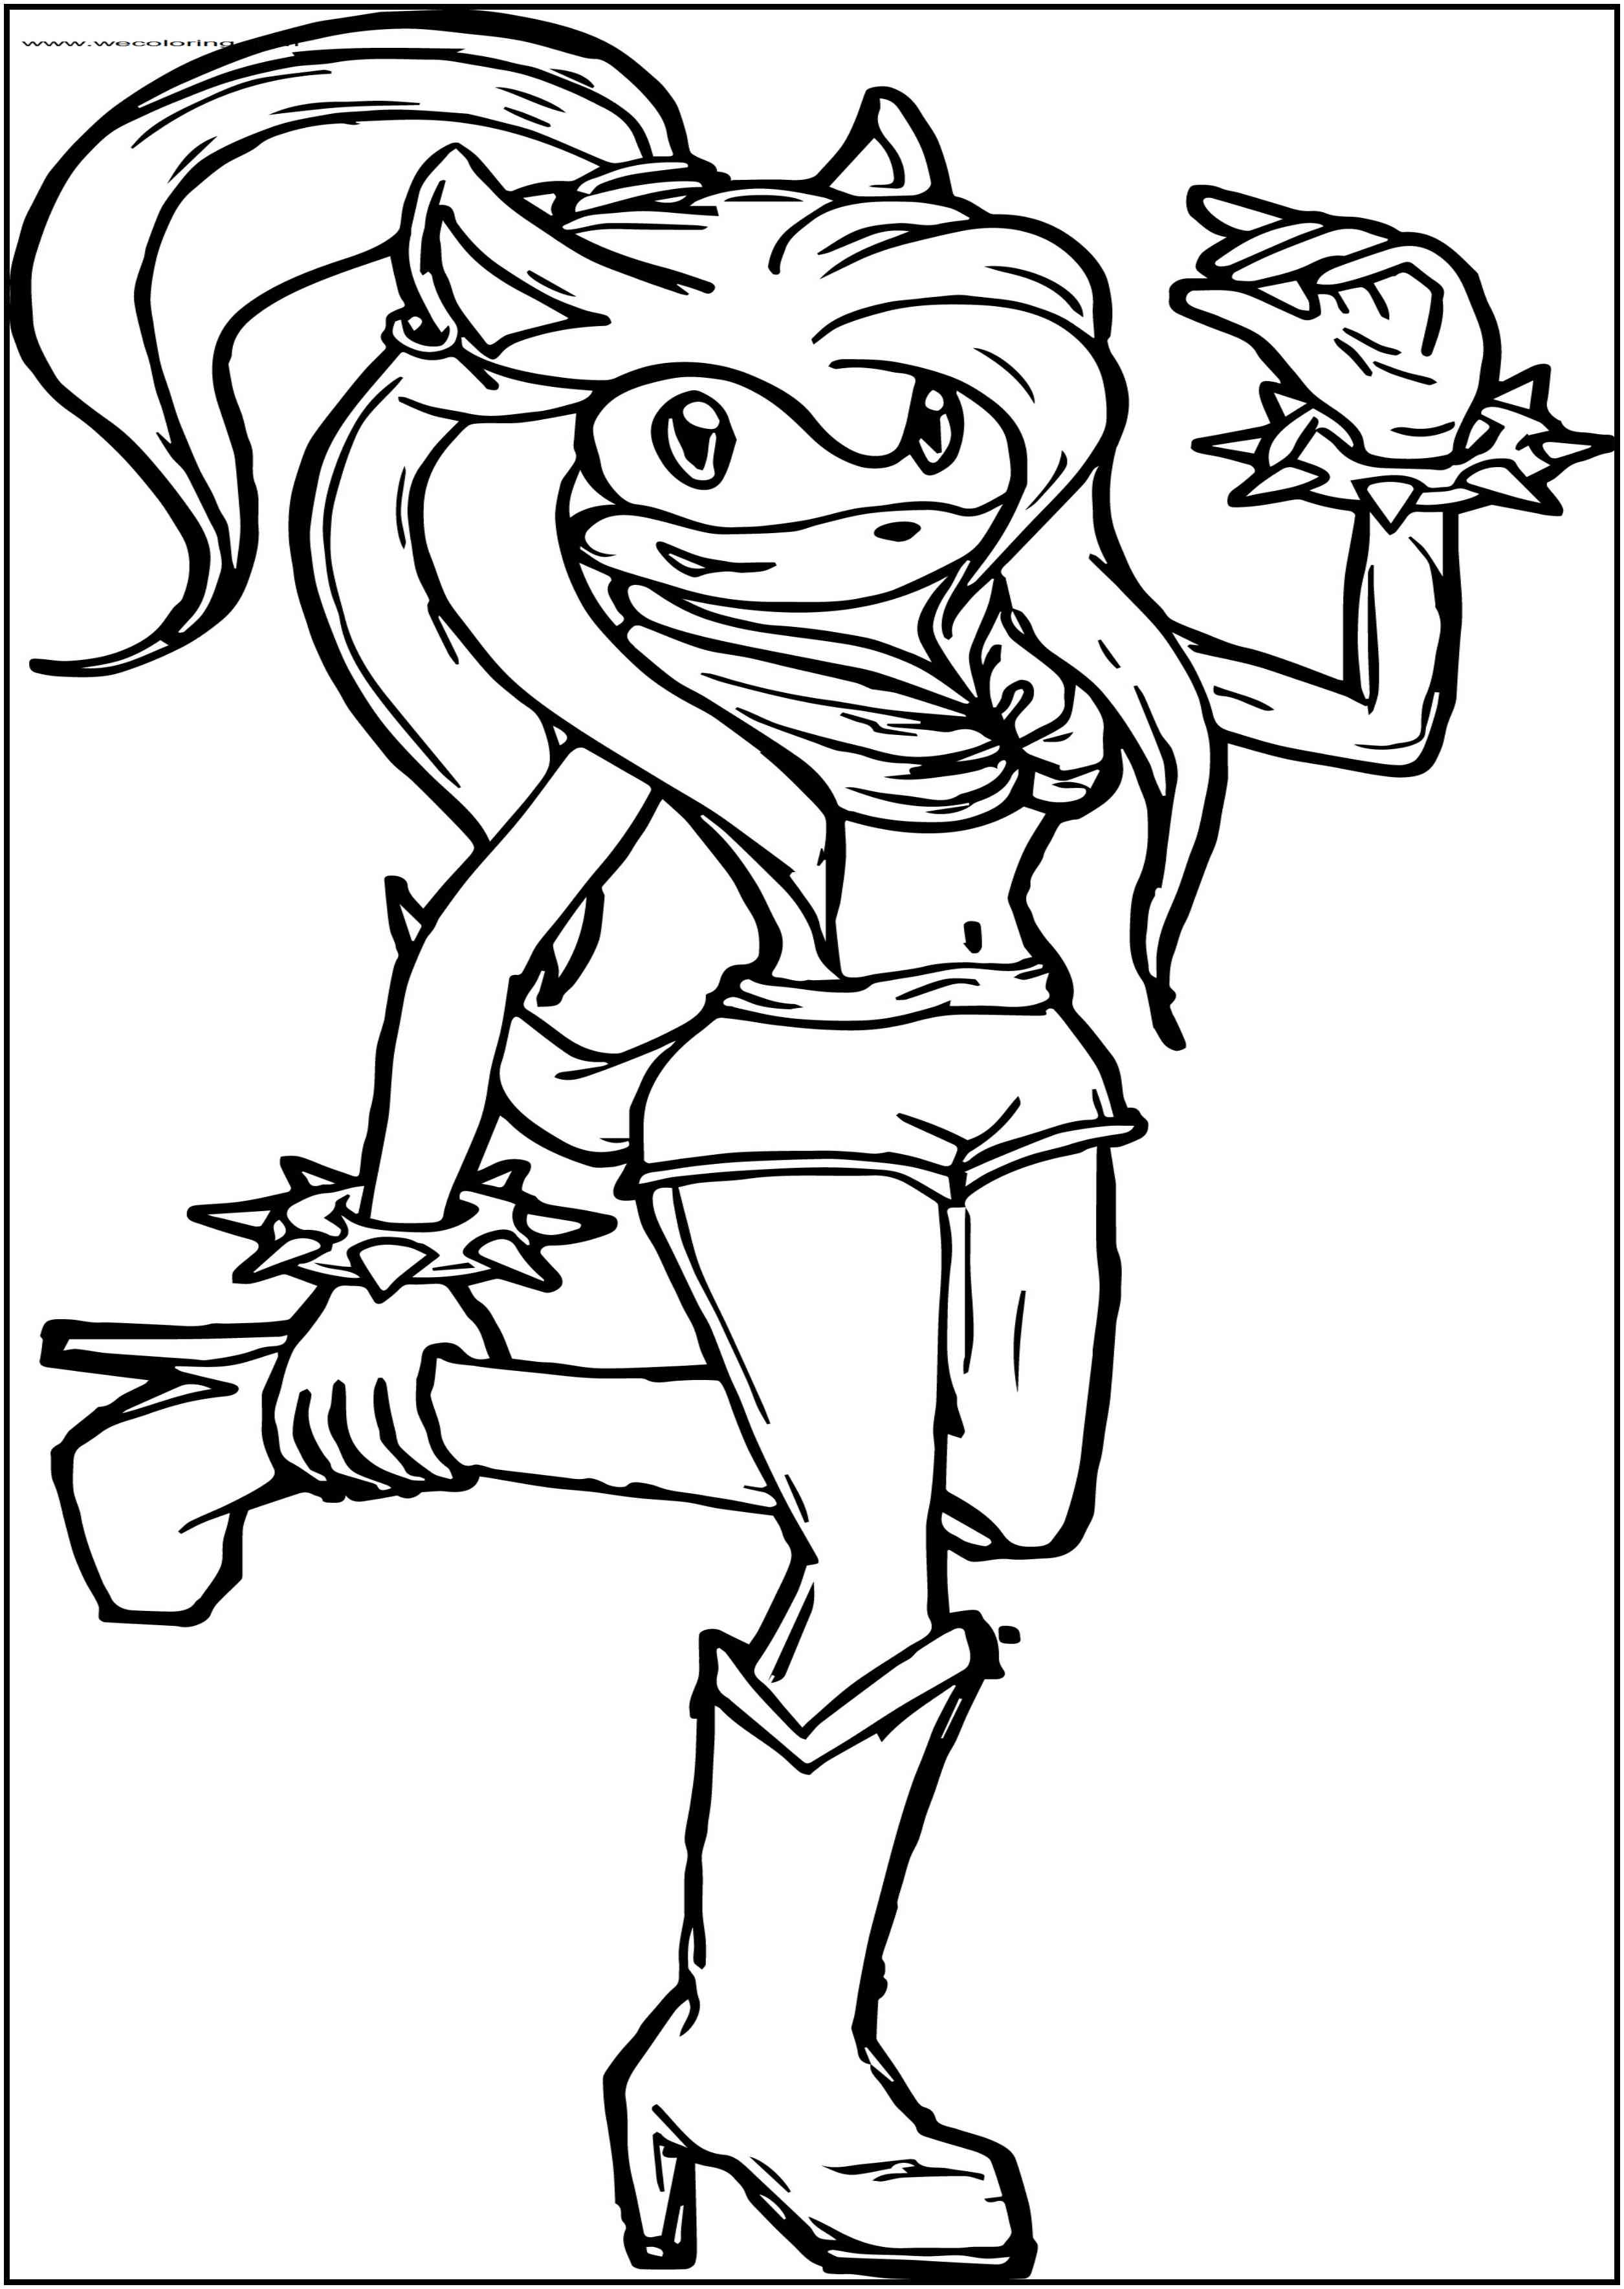 Rock Coloring Page Adult Amy Rose Rock N Roll The Cruelone Coloring Page Wecoloring